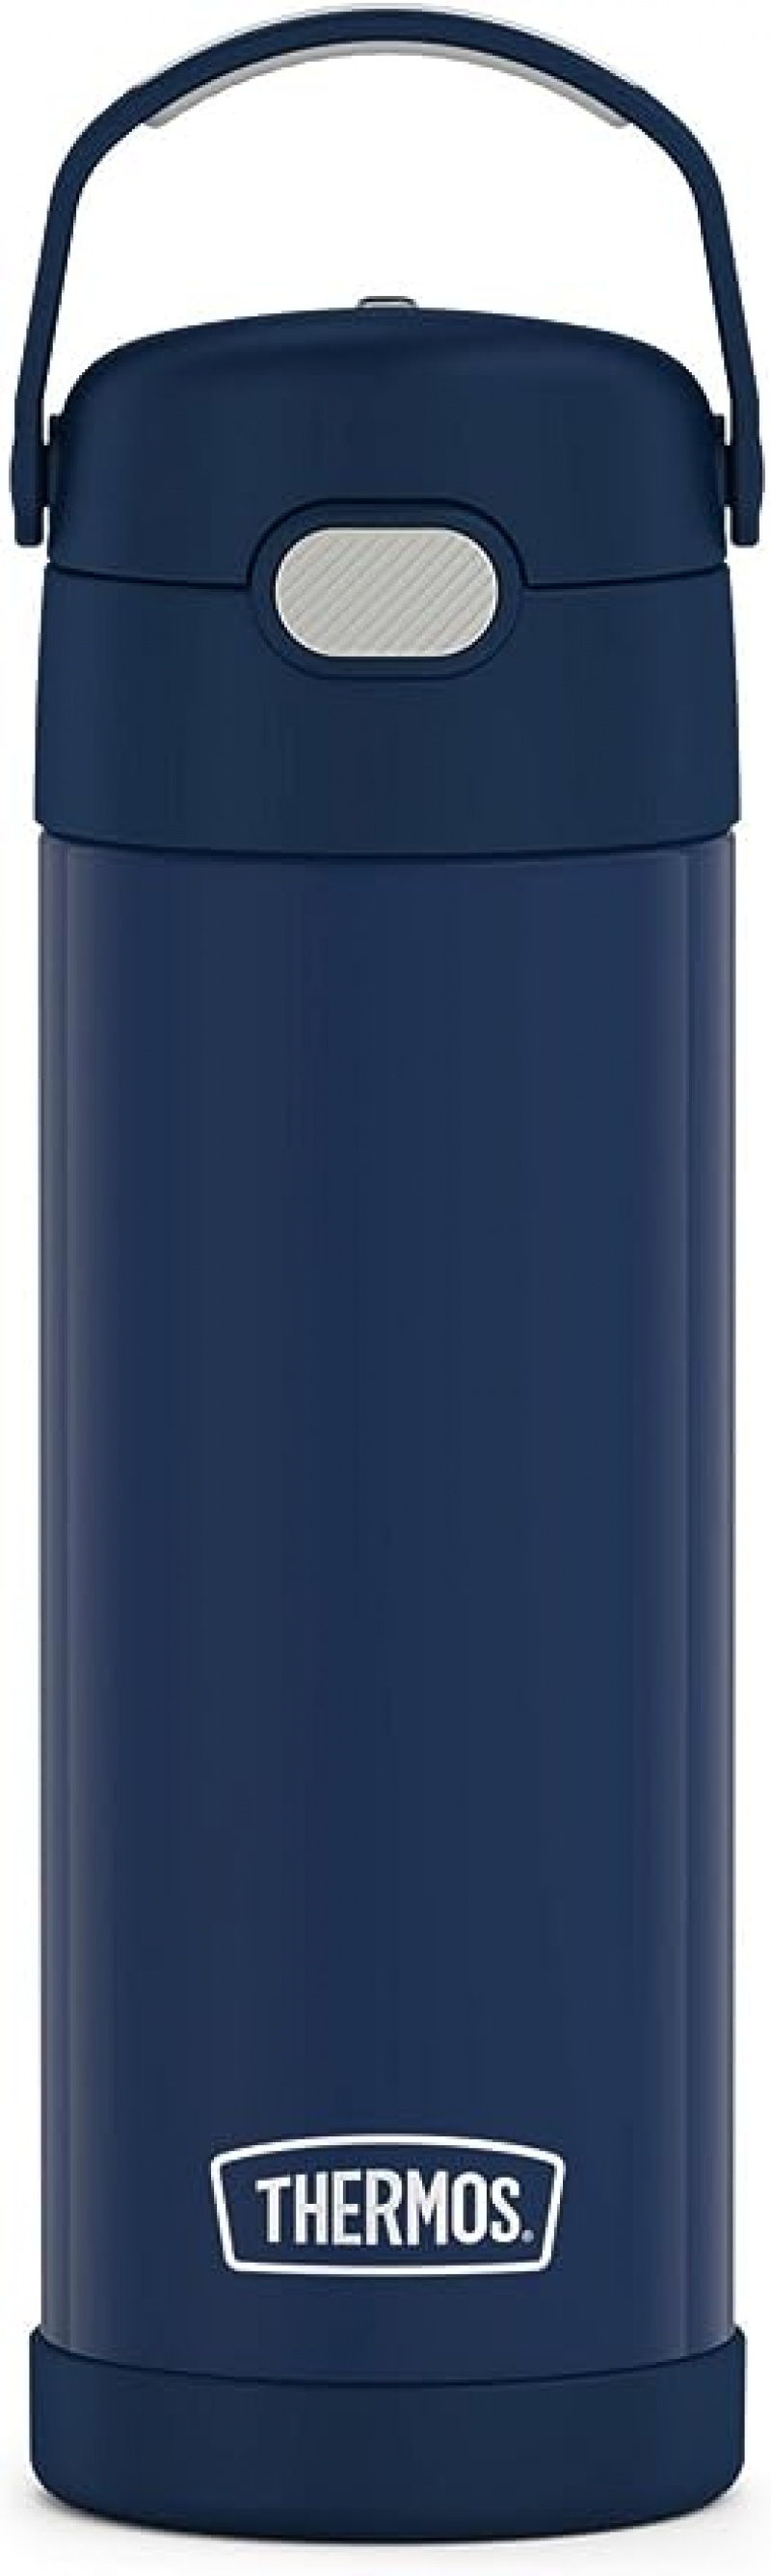 ihocon: THERMOS FUNTAINER 16 Ounce Stainless Steel Vacuum Insulated Bottle with Wide Spout Lid不銹鋼保温水瓶